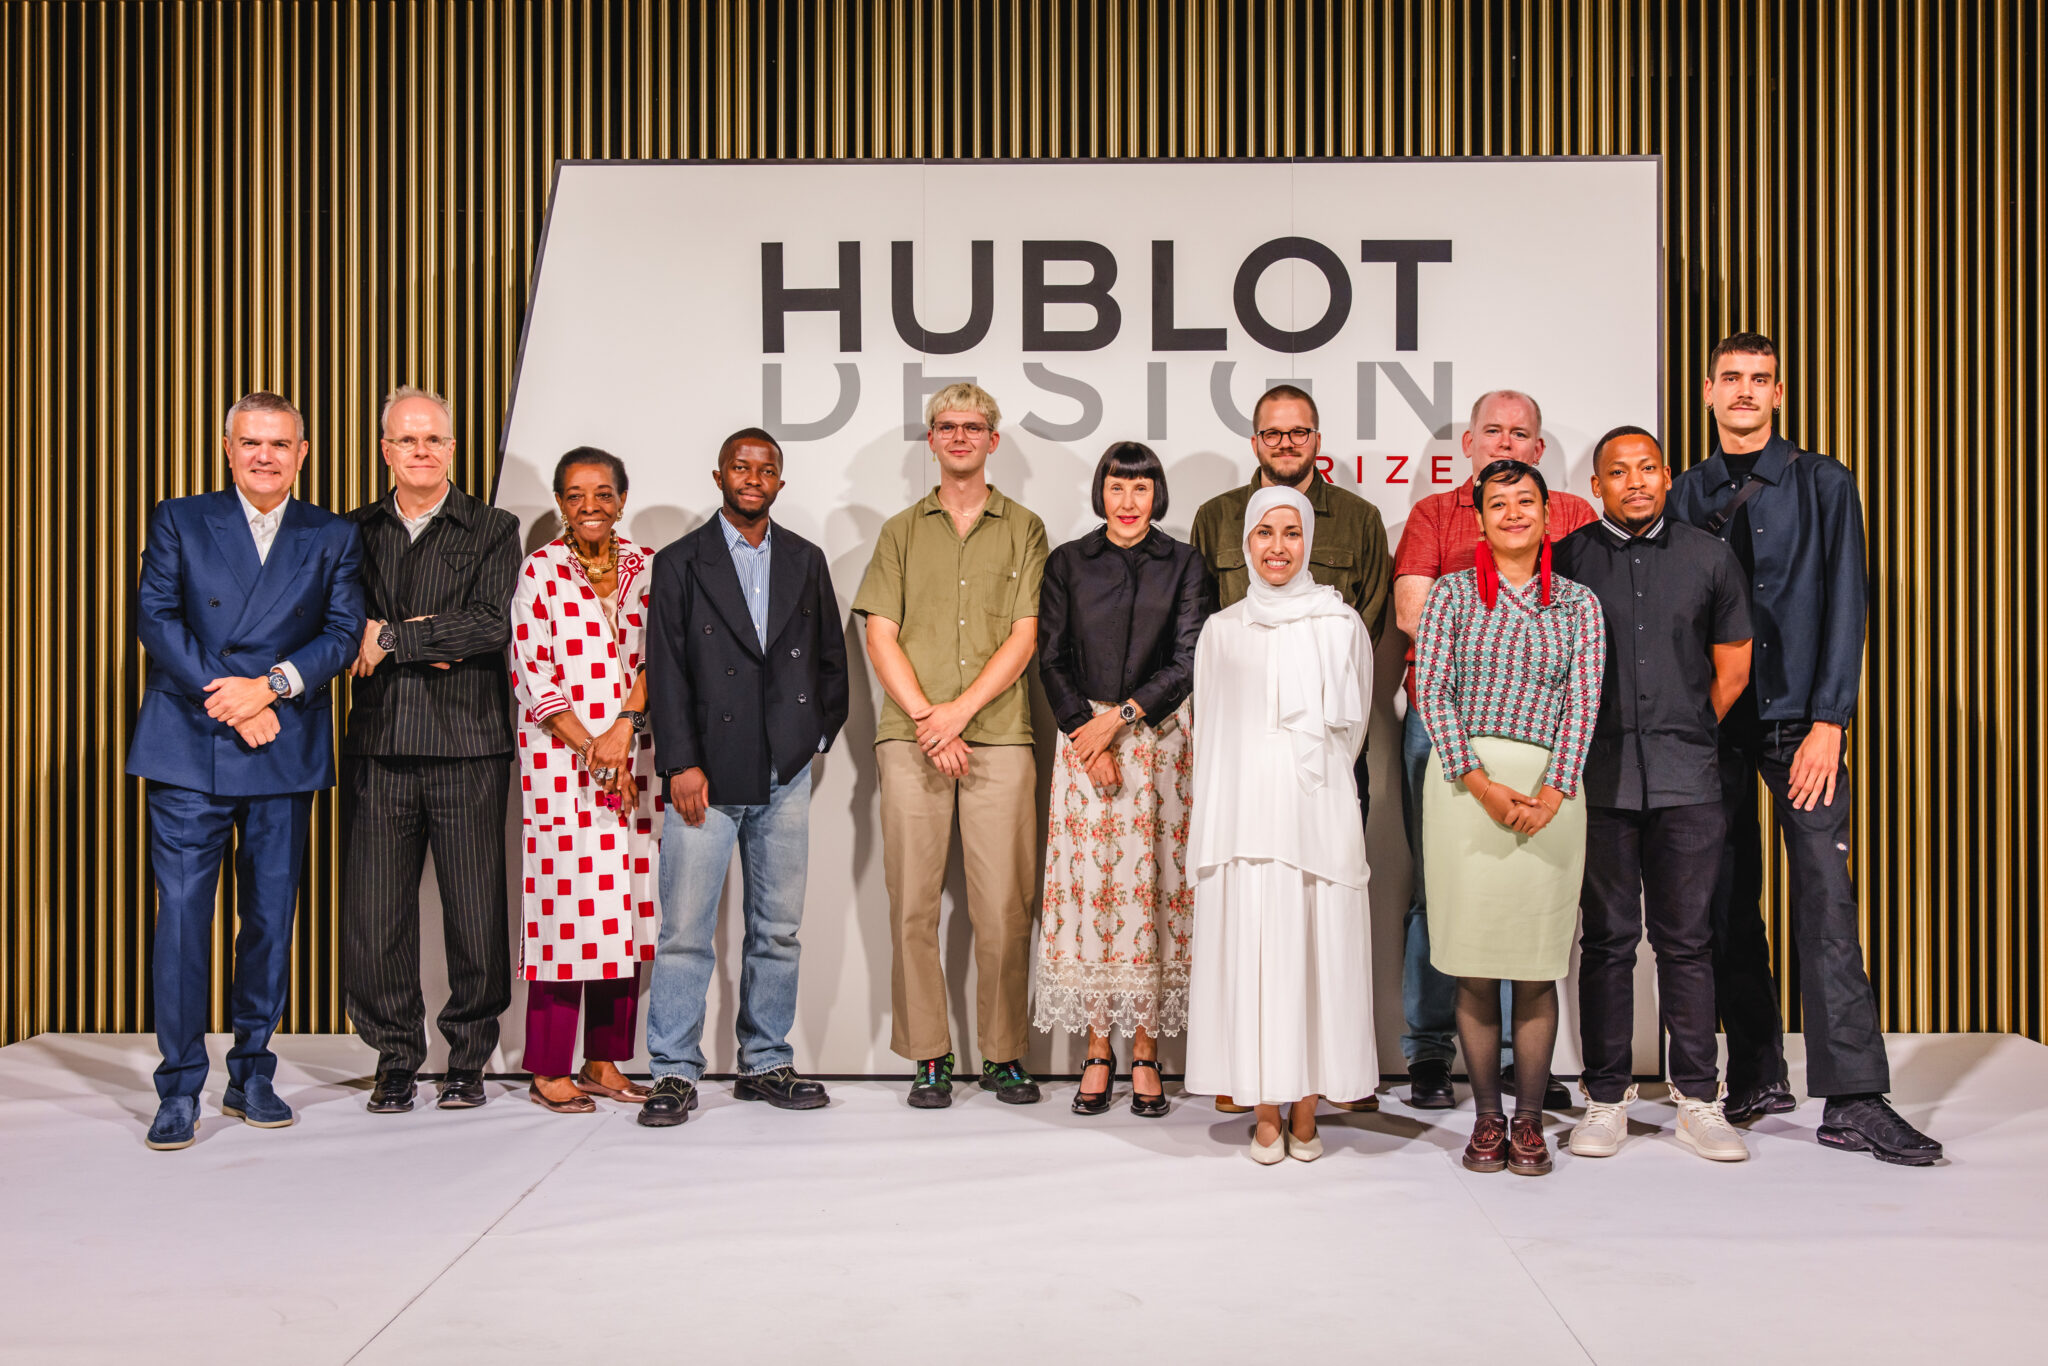 The hublot design prize finalists and the jury